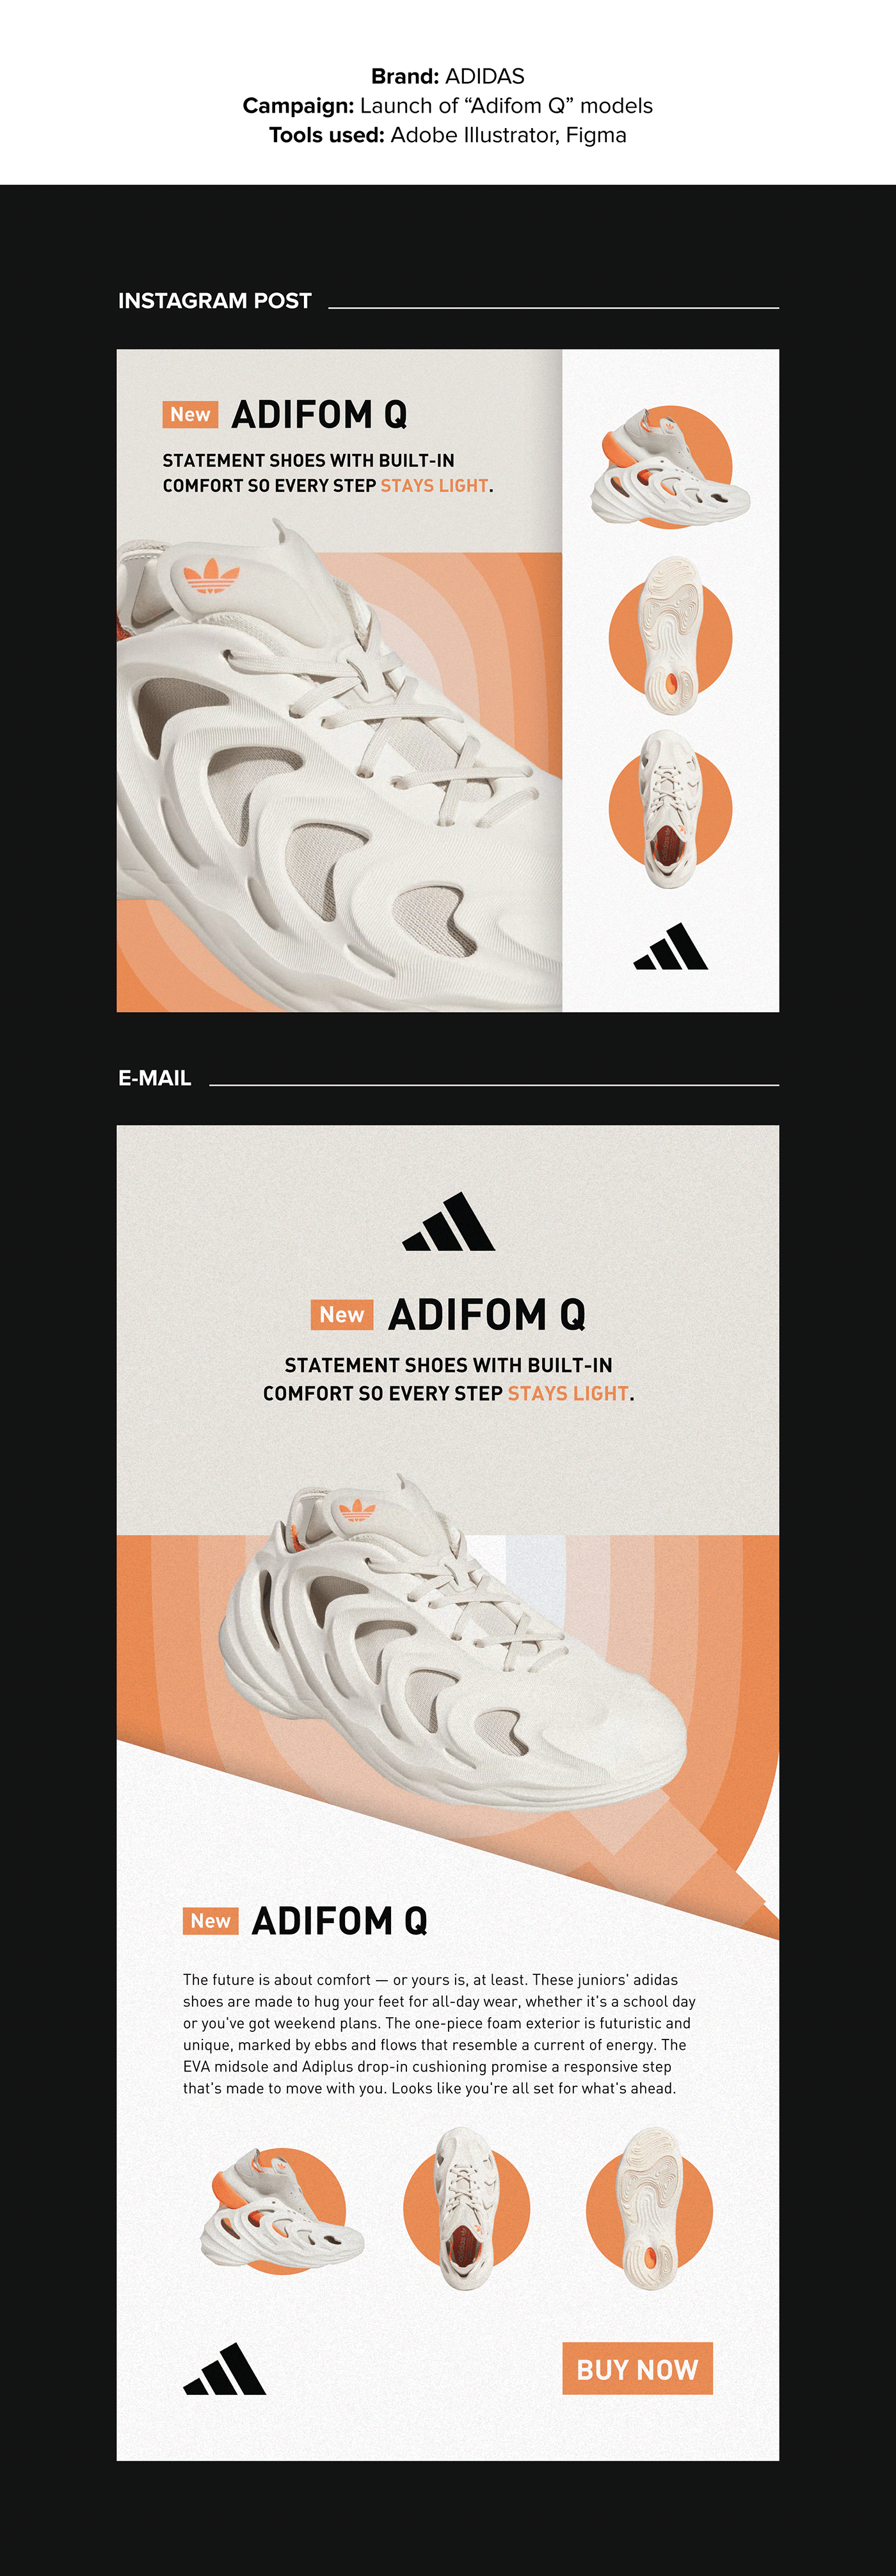 adidas Email instagram sports sneakers Fashion 